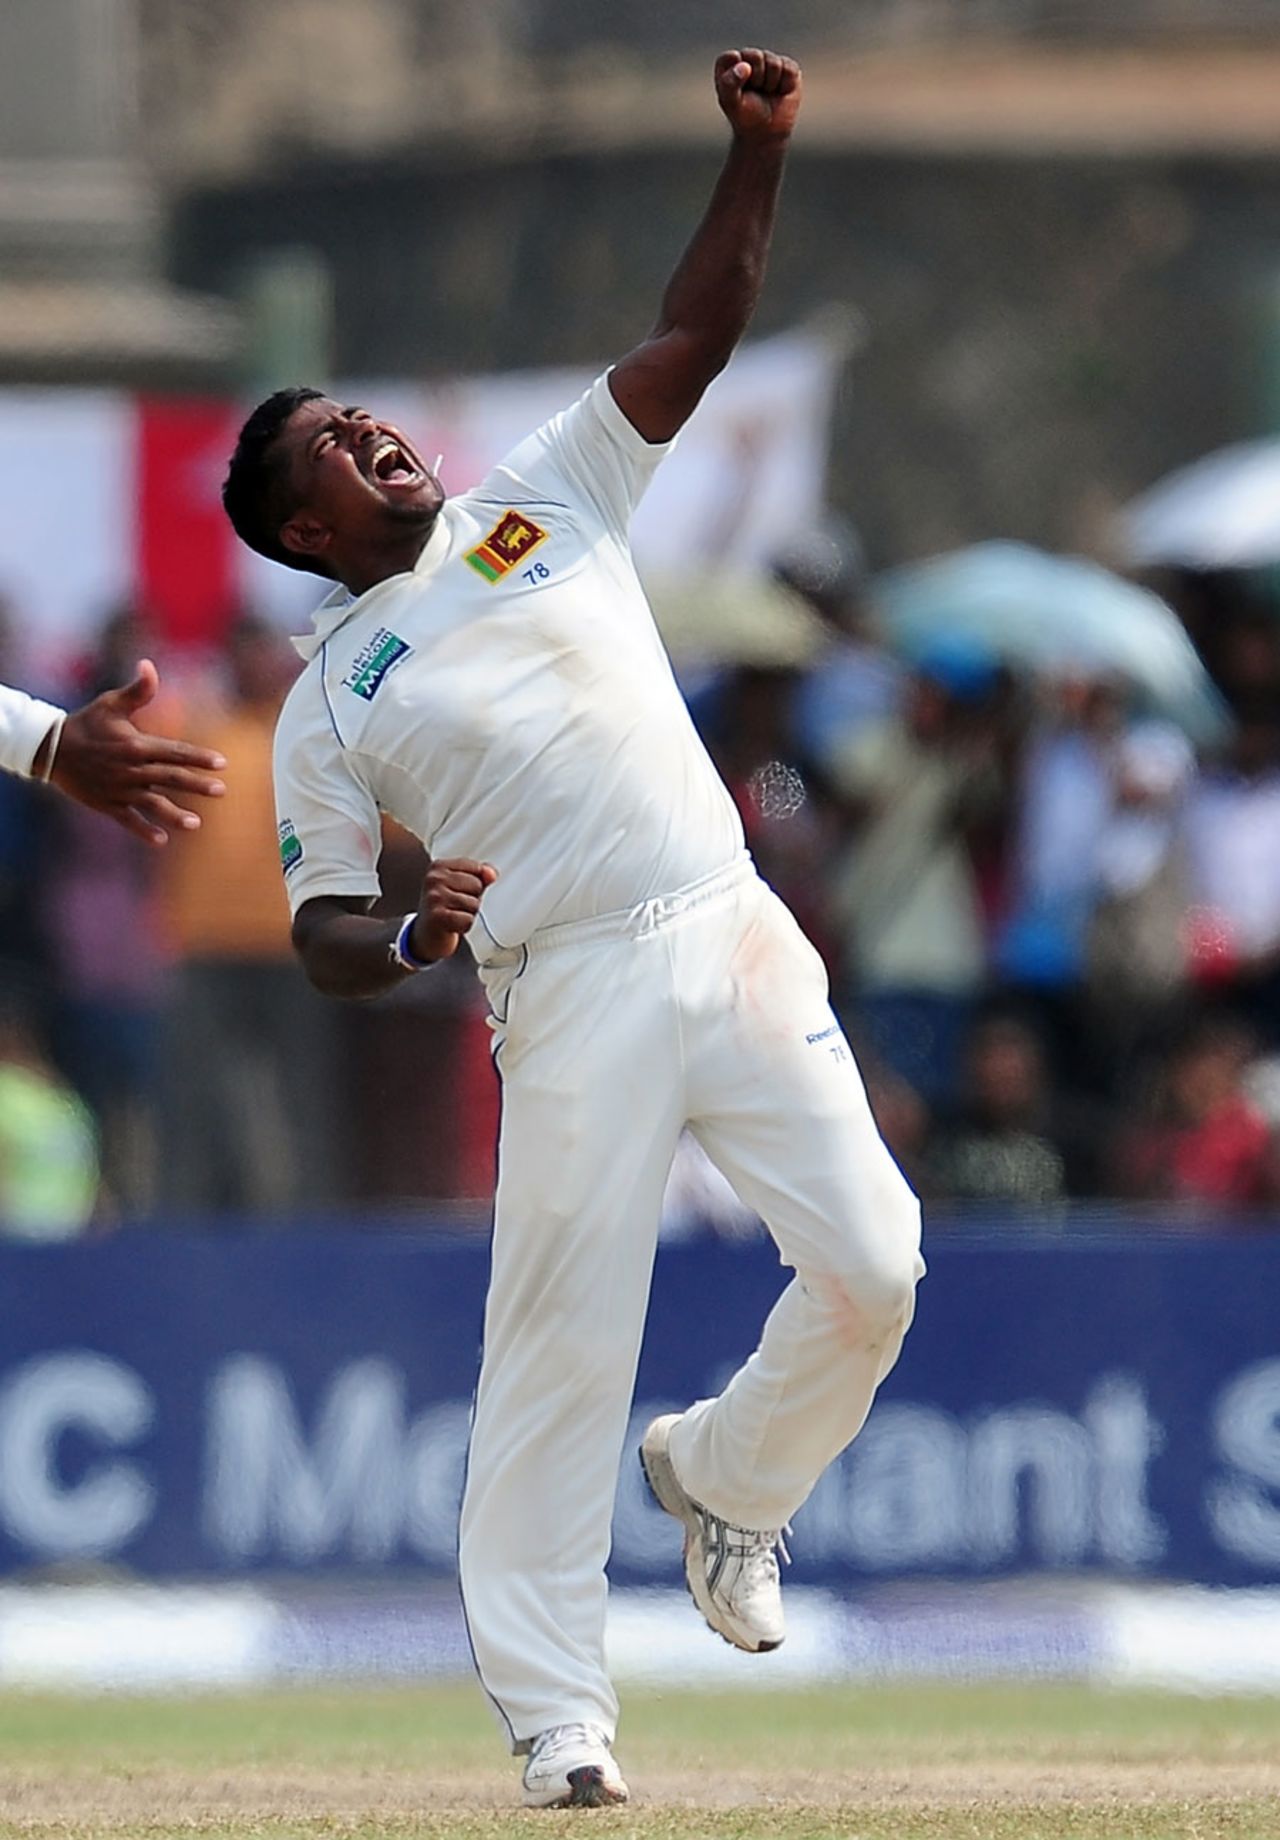 Rangana Herath celebrates his twelfth wicket of the match, trapping Graeme Swann lbw , Sri Lanka v England, 1st Test, Galle, 4th day, March 29, 2012